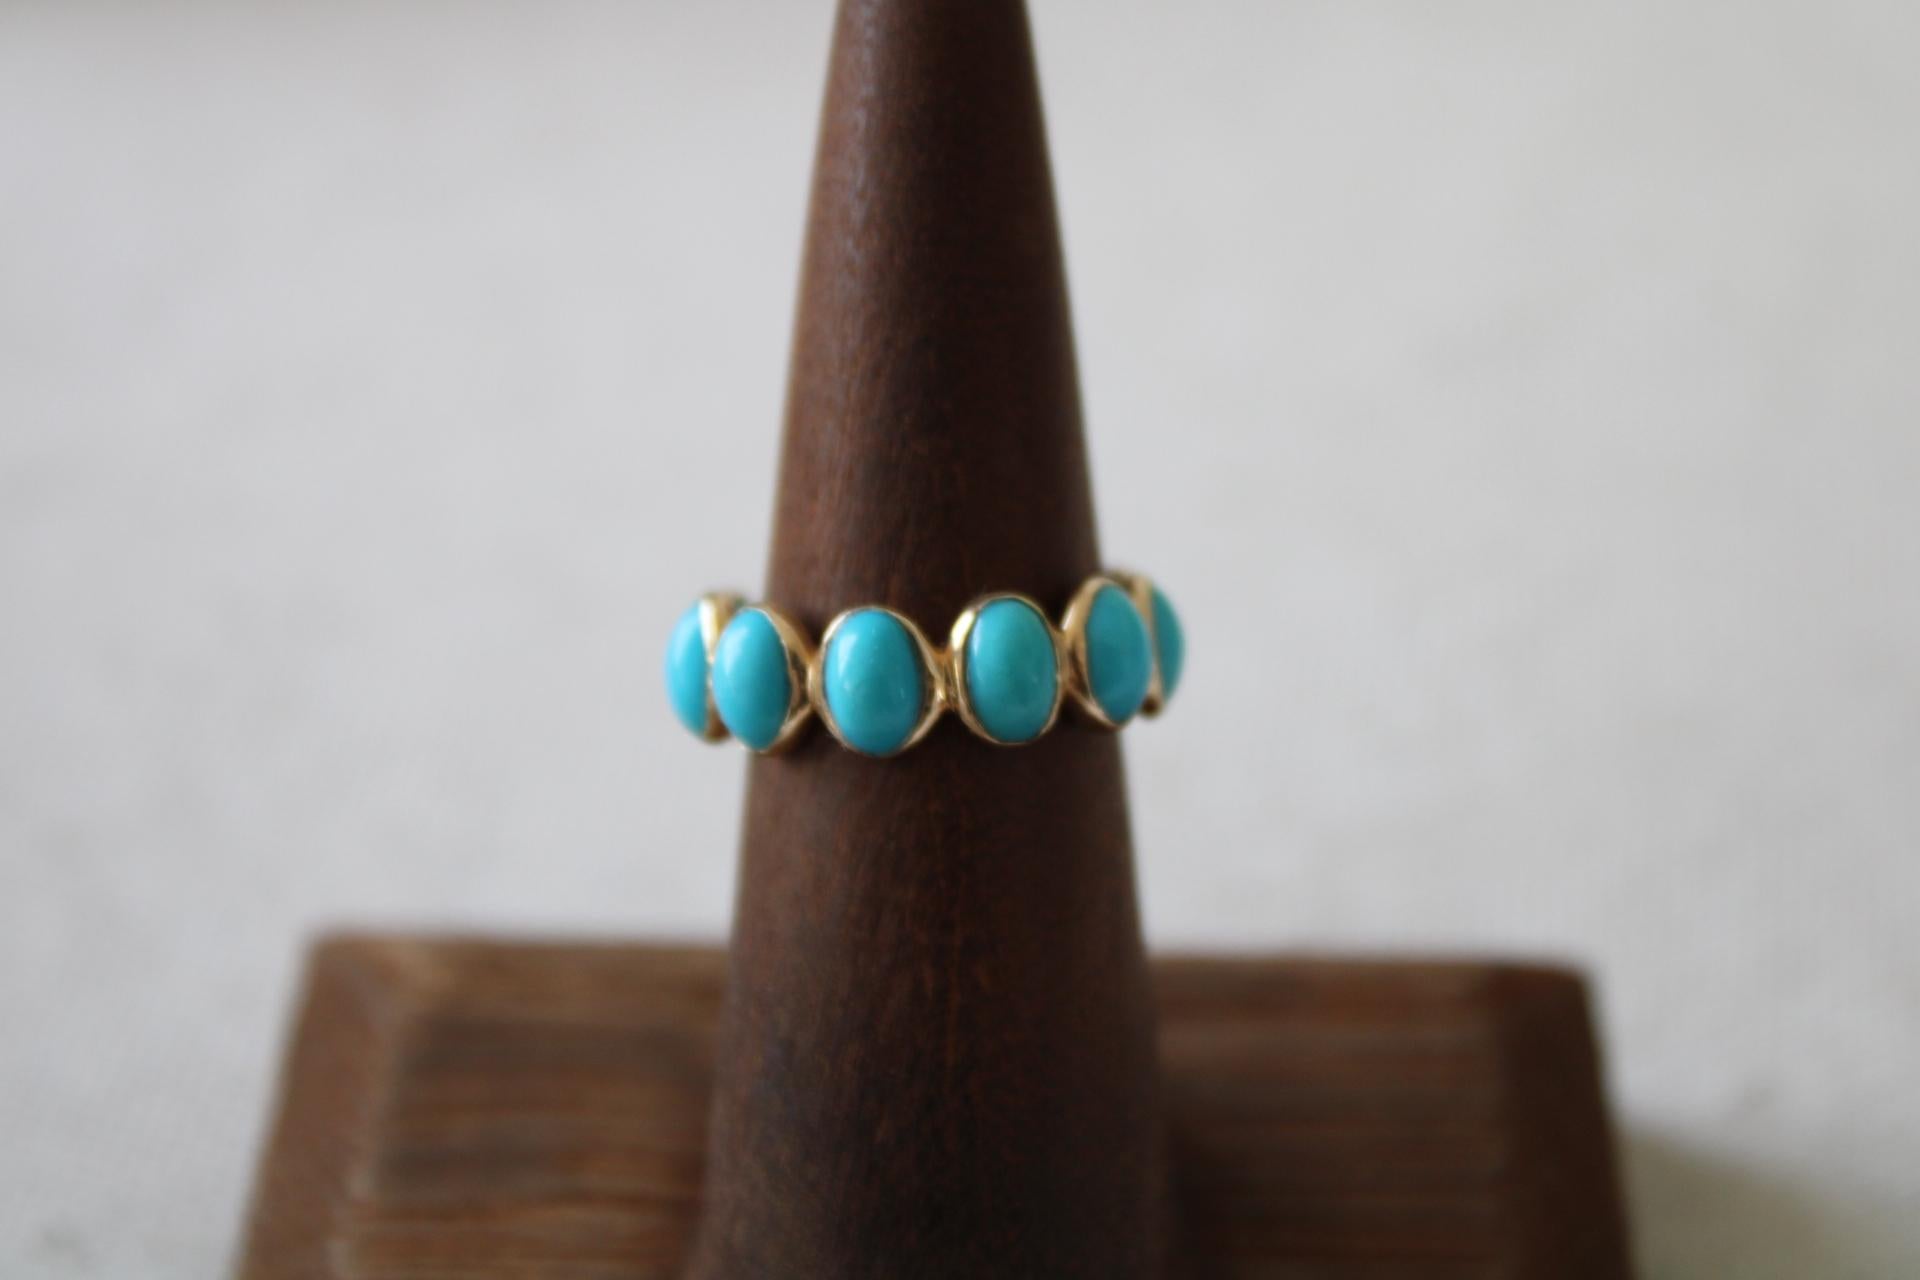 This 14K Gold Turquoise eternity band has 12 cabochon turquoise stones totaling 4.78 carat weight. The ring is size 7 and is bezel set in 14K gold. The turquoise stones are  ethically sourced in Jaipur and made in the USA.
This ring is smooth on the